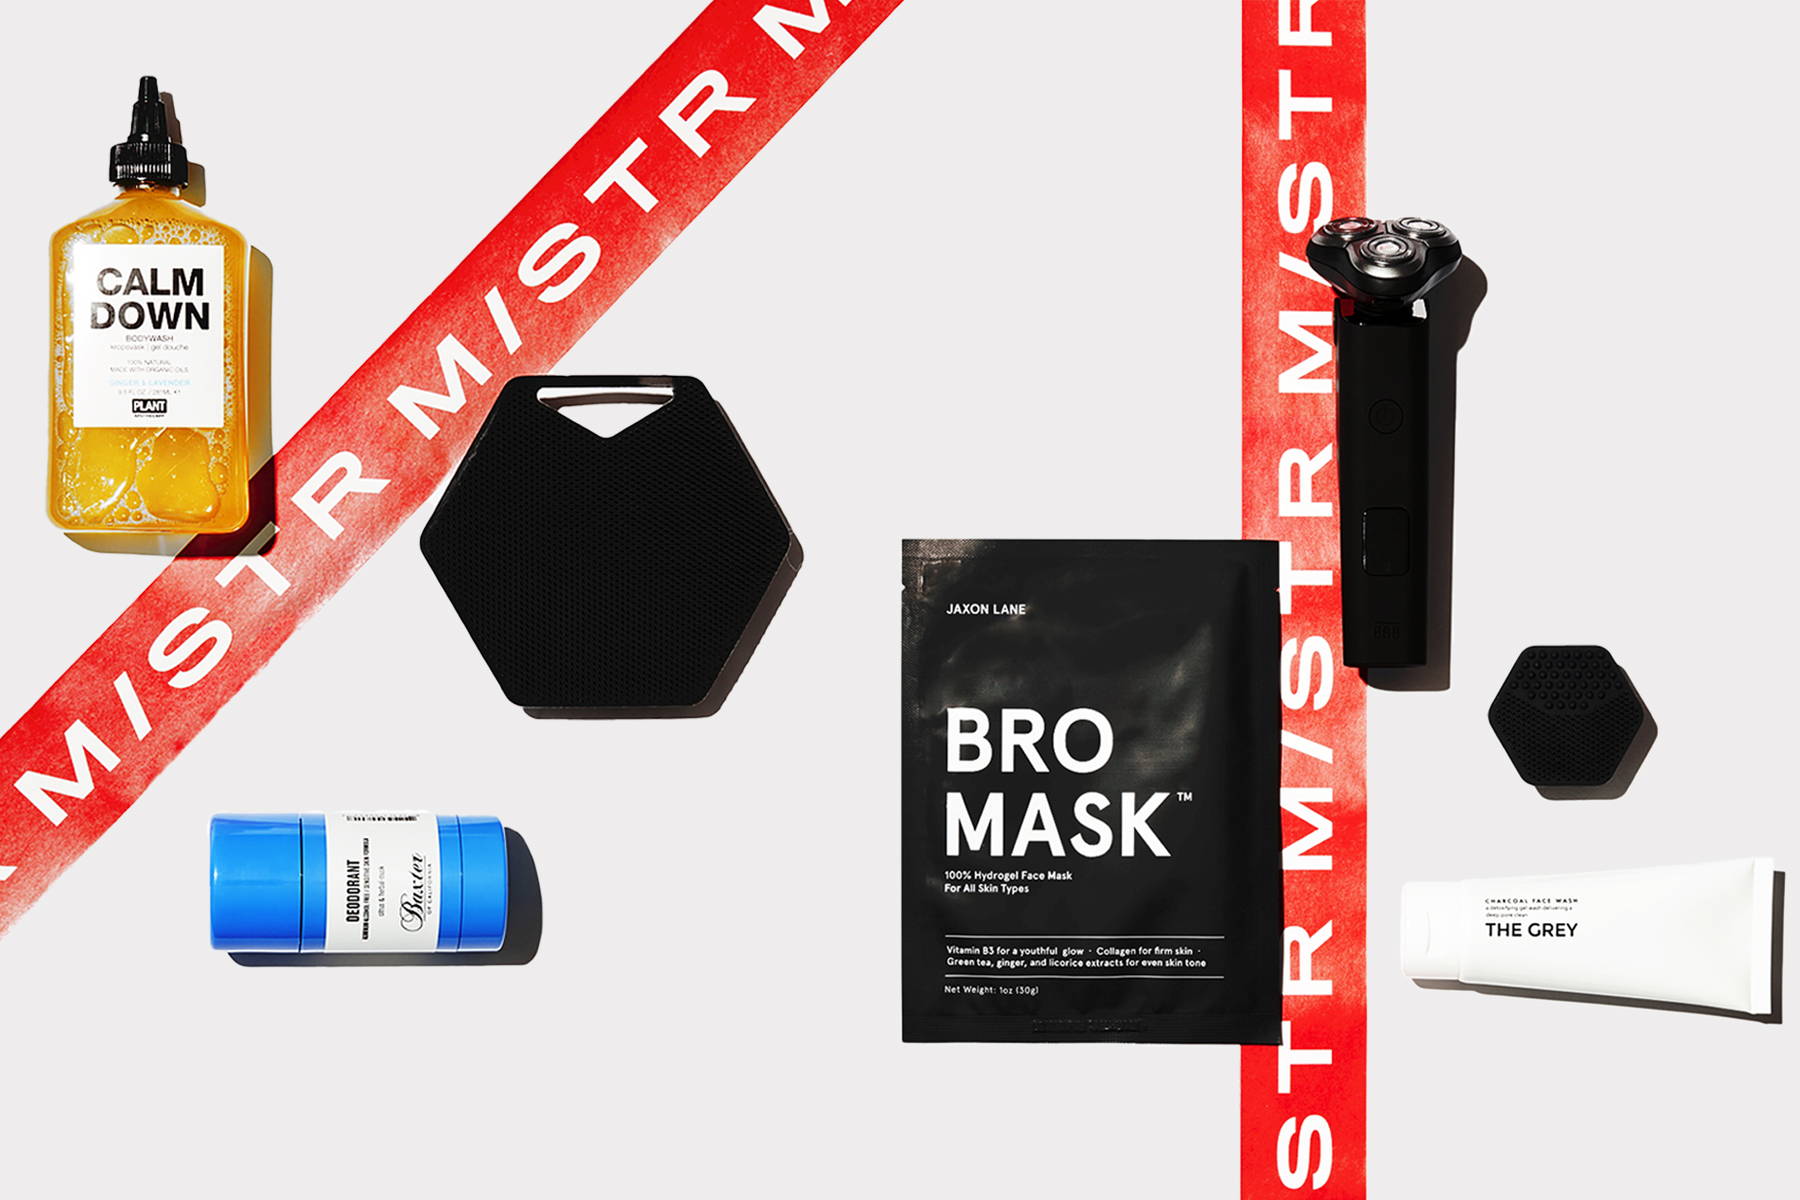 MISTR's Father's Day Gift Sets